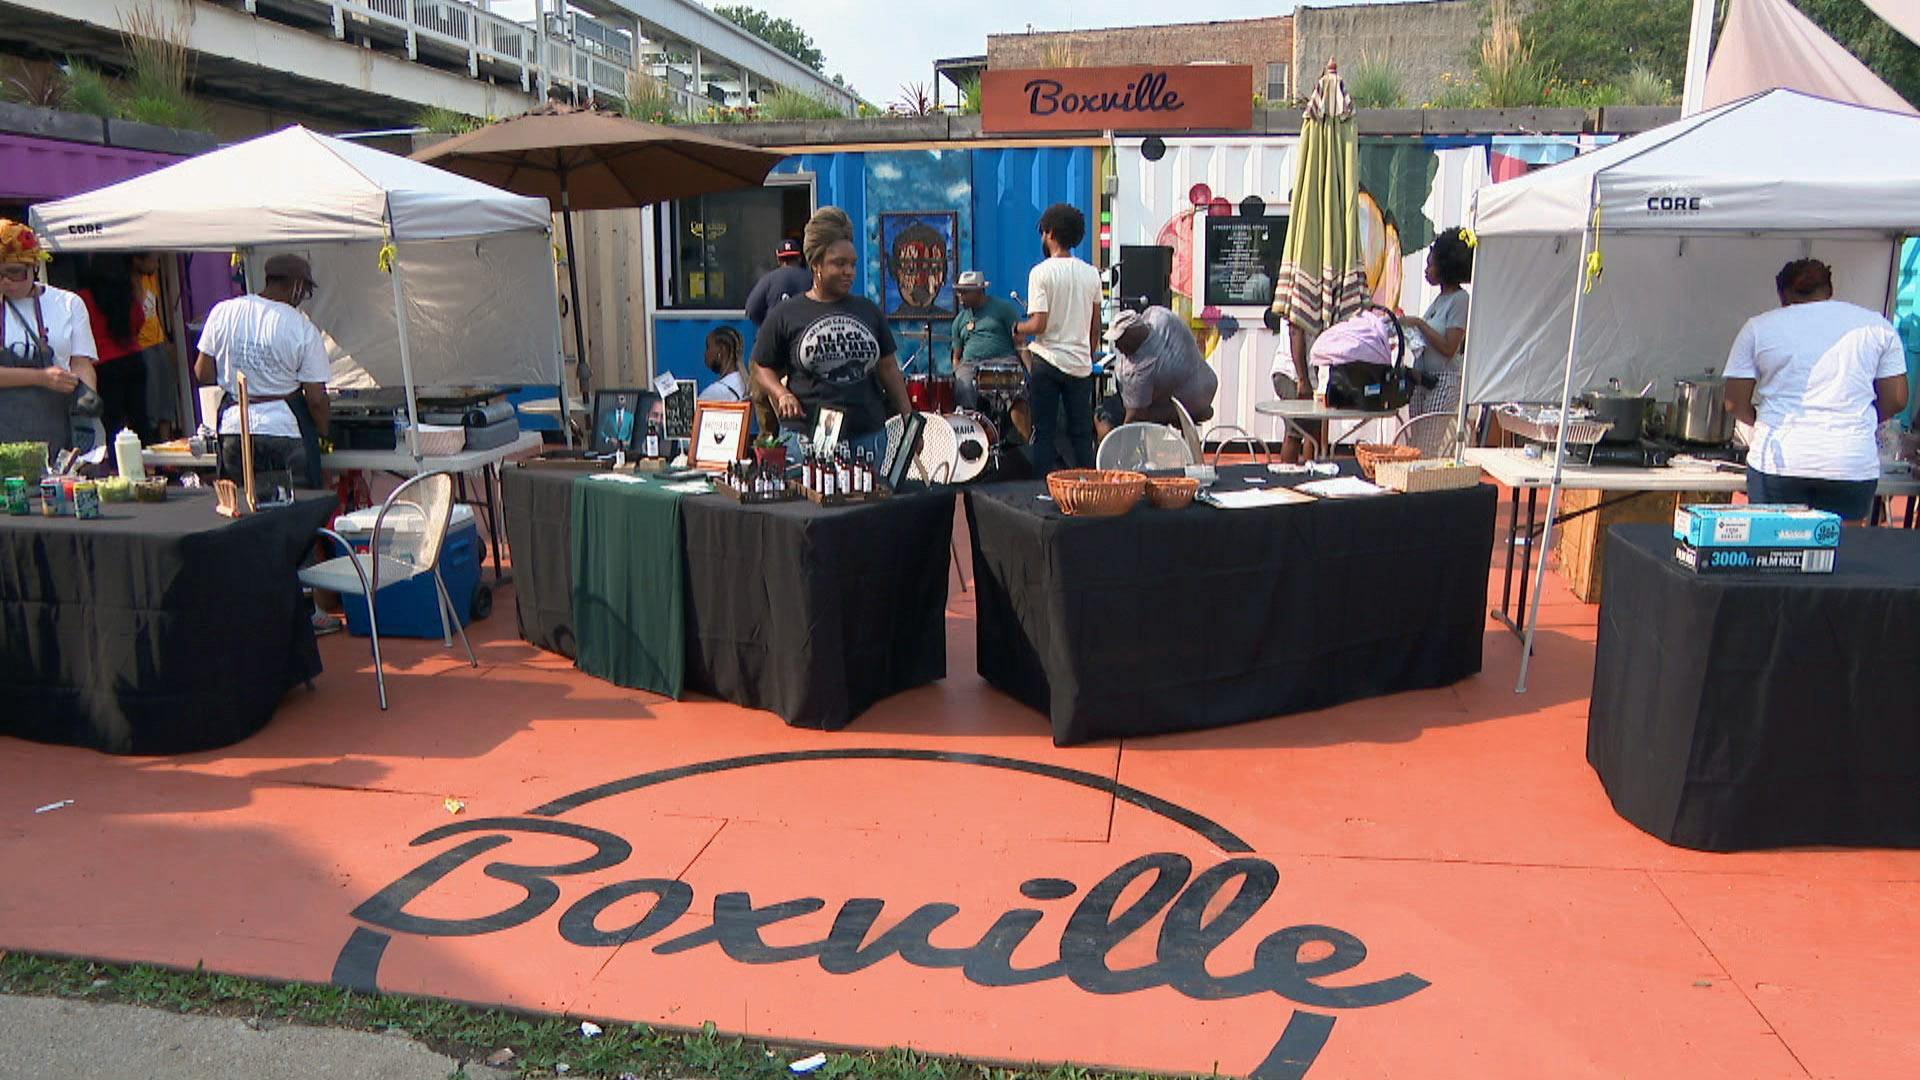 Boxville at 51st Street and Calumet Avenue in Chicago. (WTTW News)